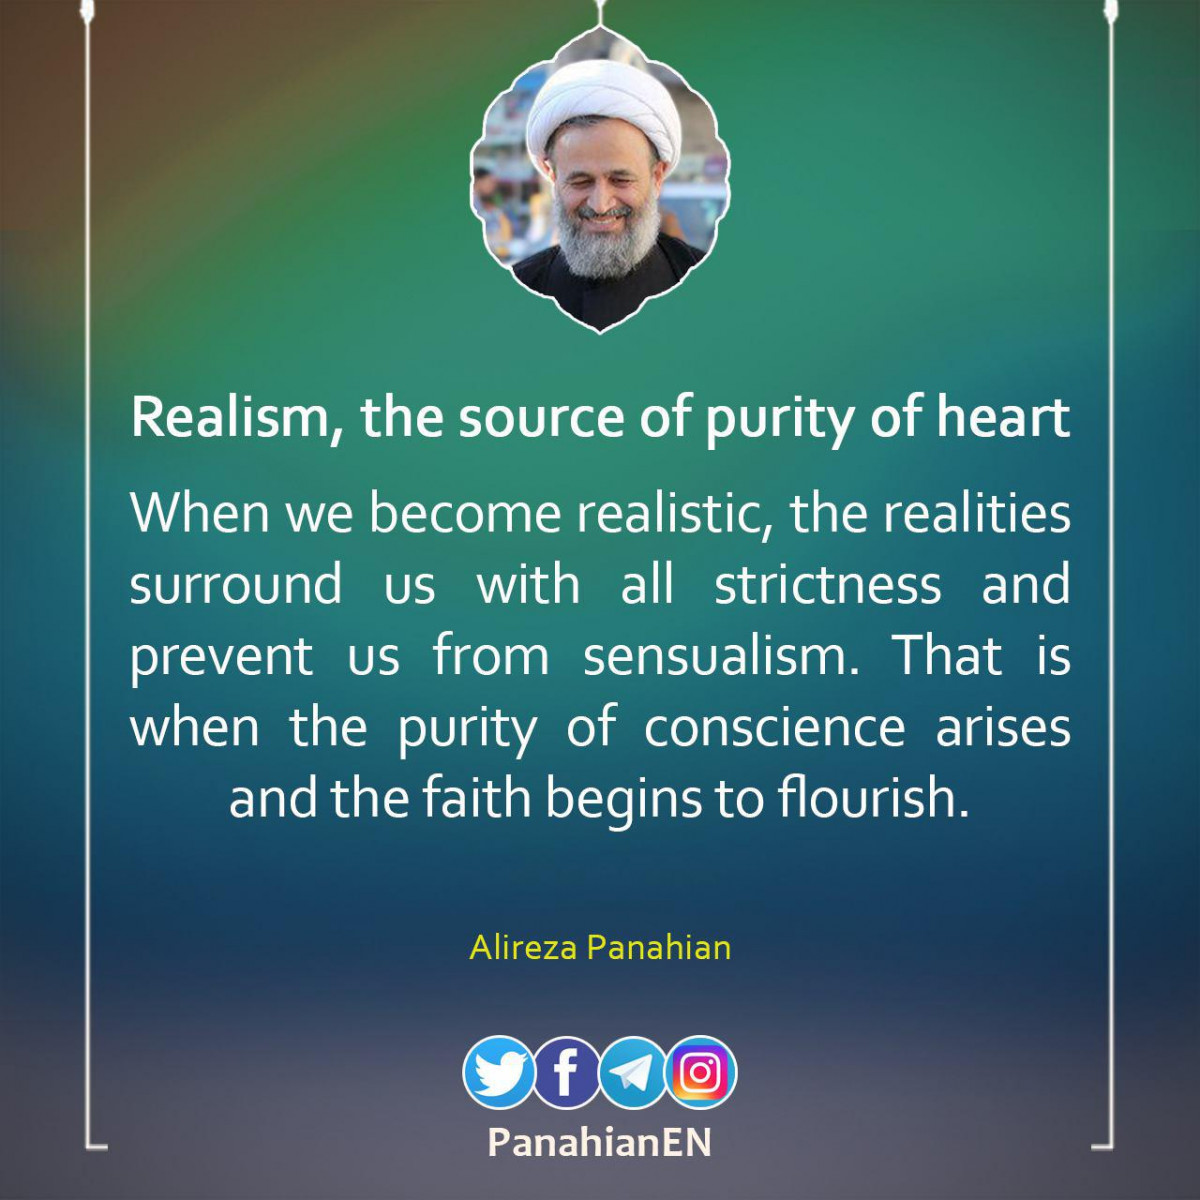 Realism, the source of purity of heart